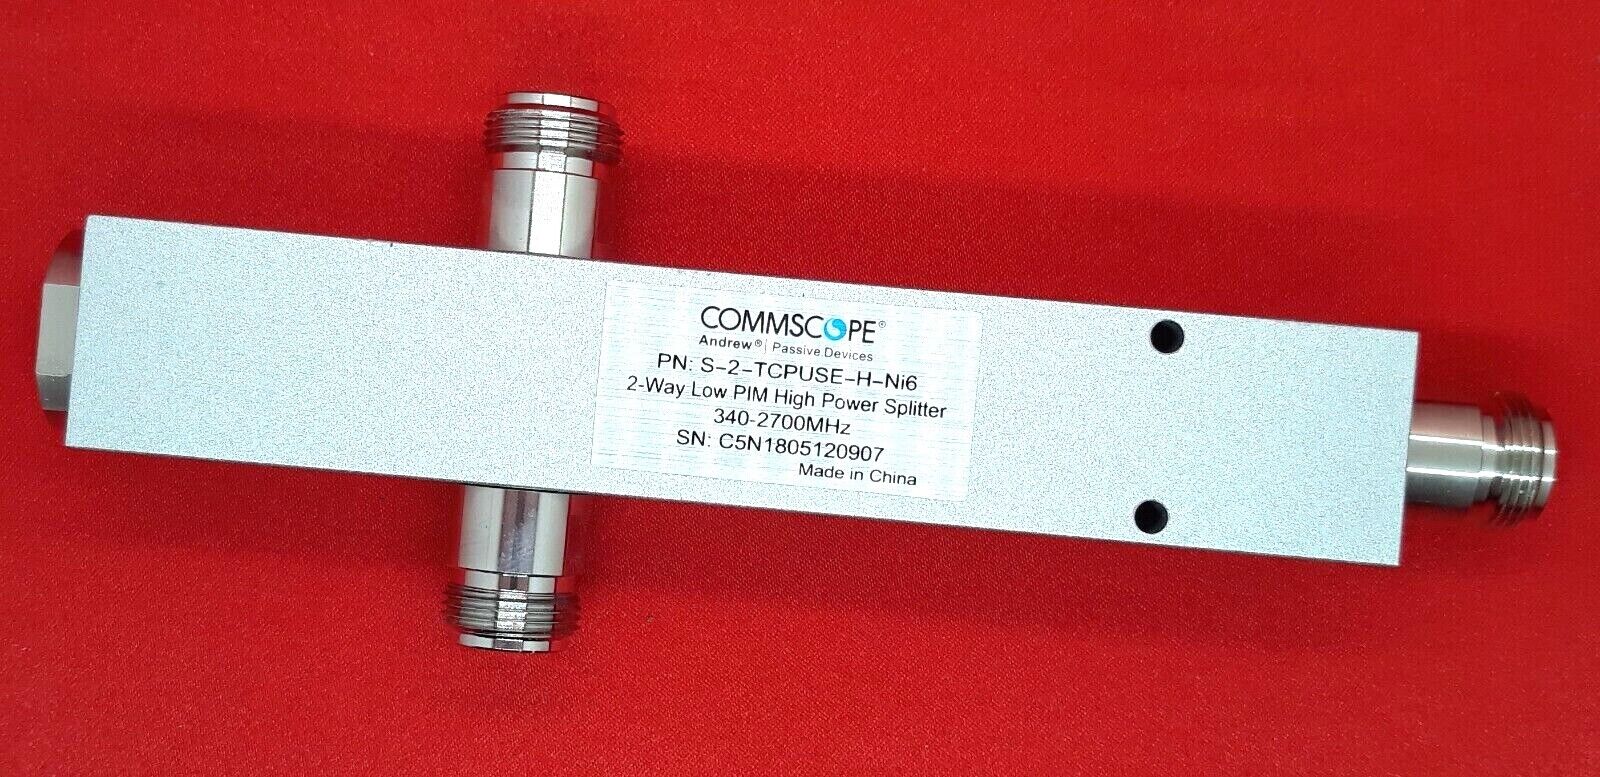 Commscope S-2-TCPUSE-H-NI6 Multiband 2-way Low PIM Reactive High Power  Splitter